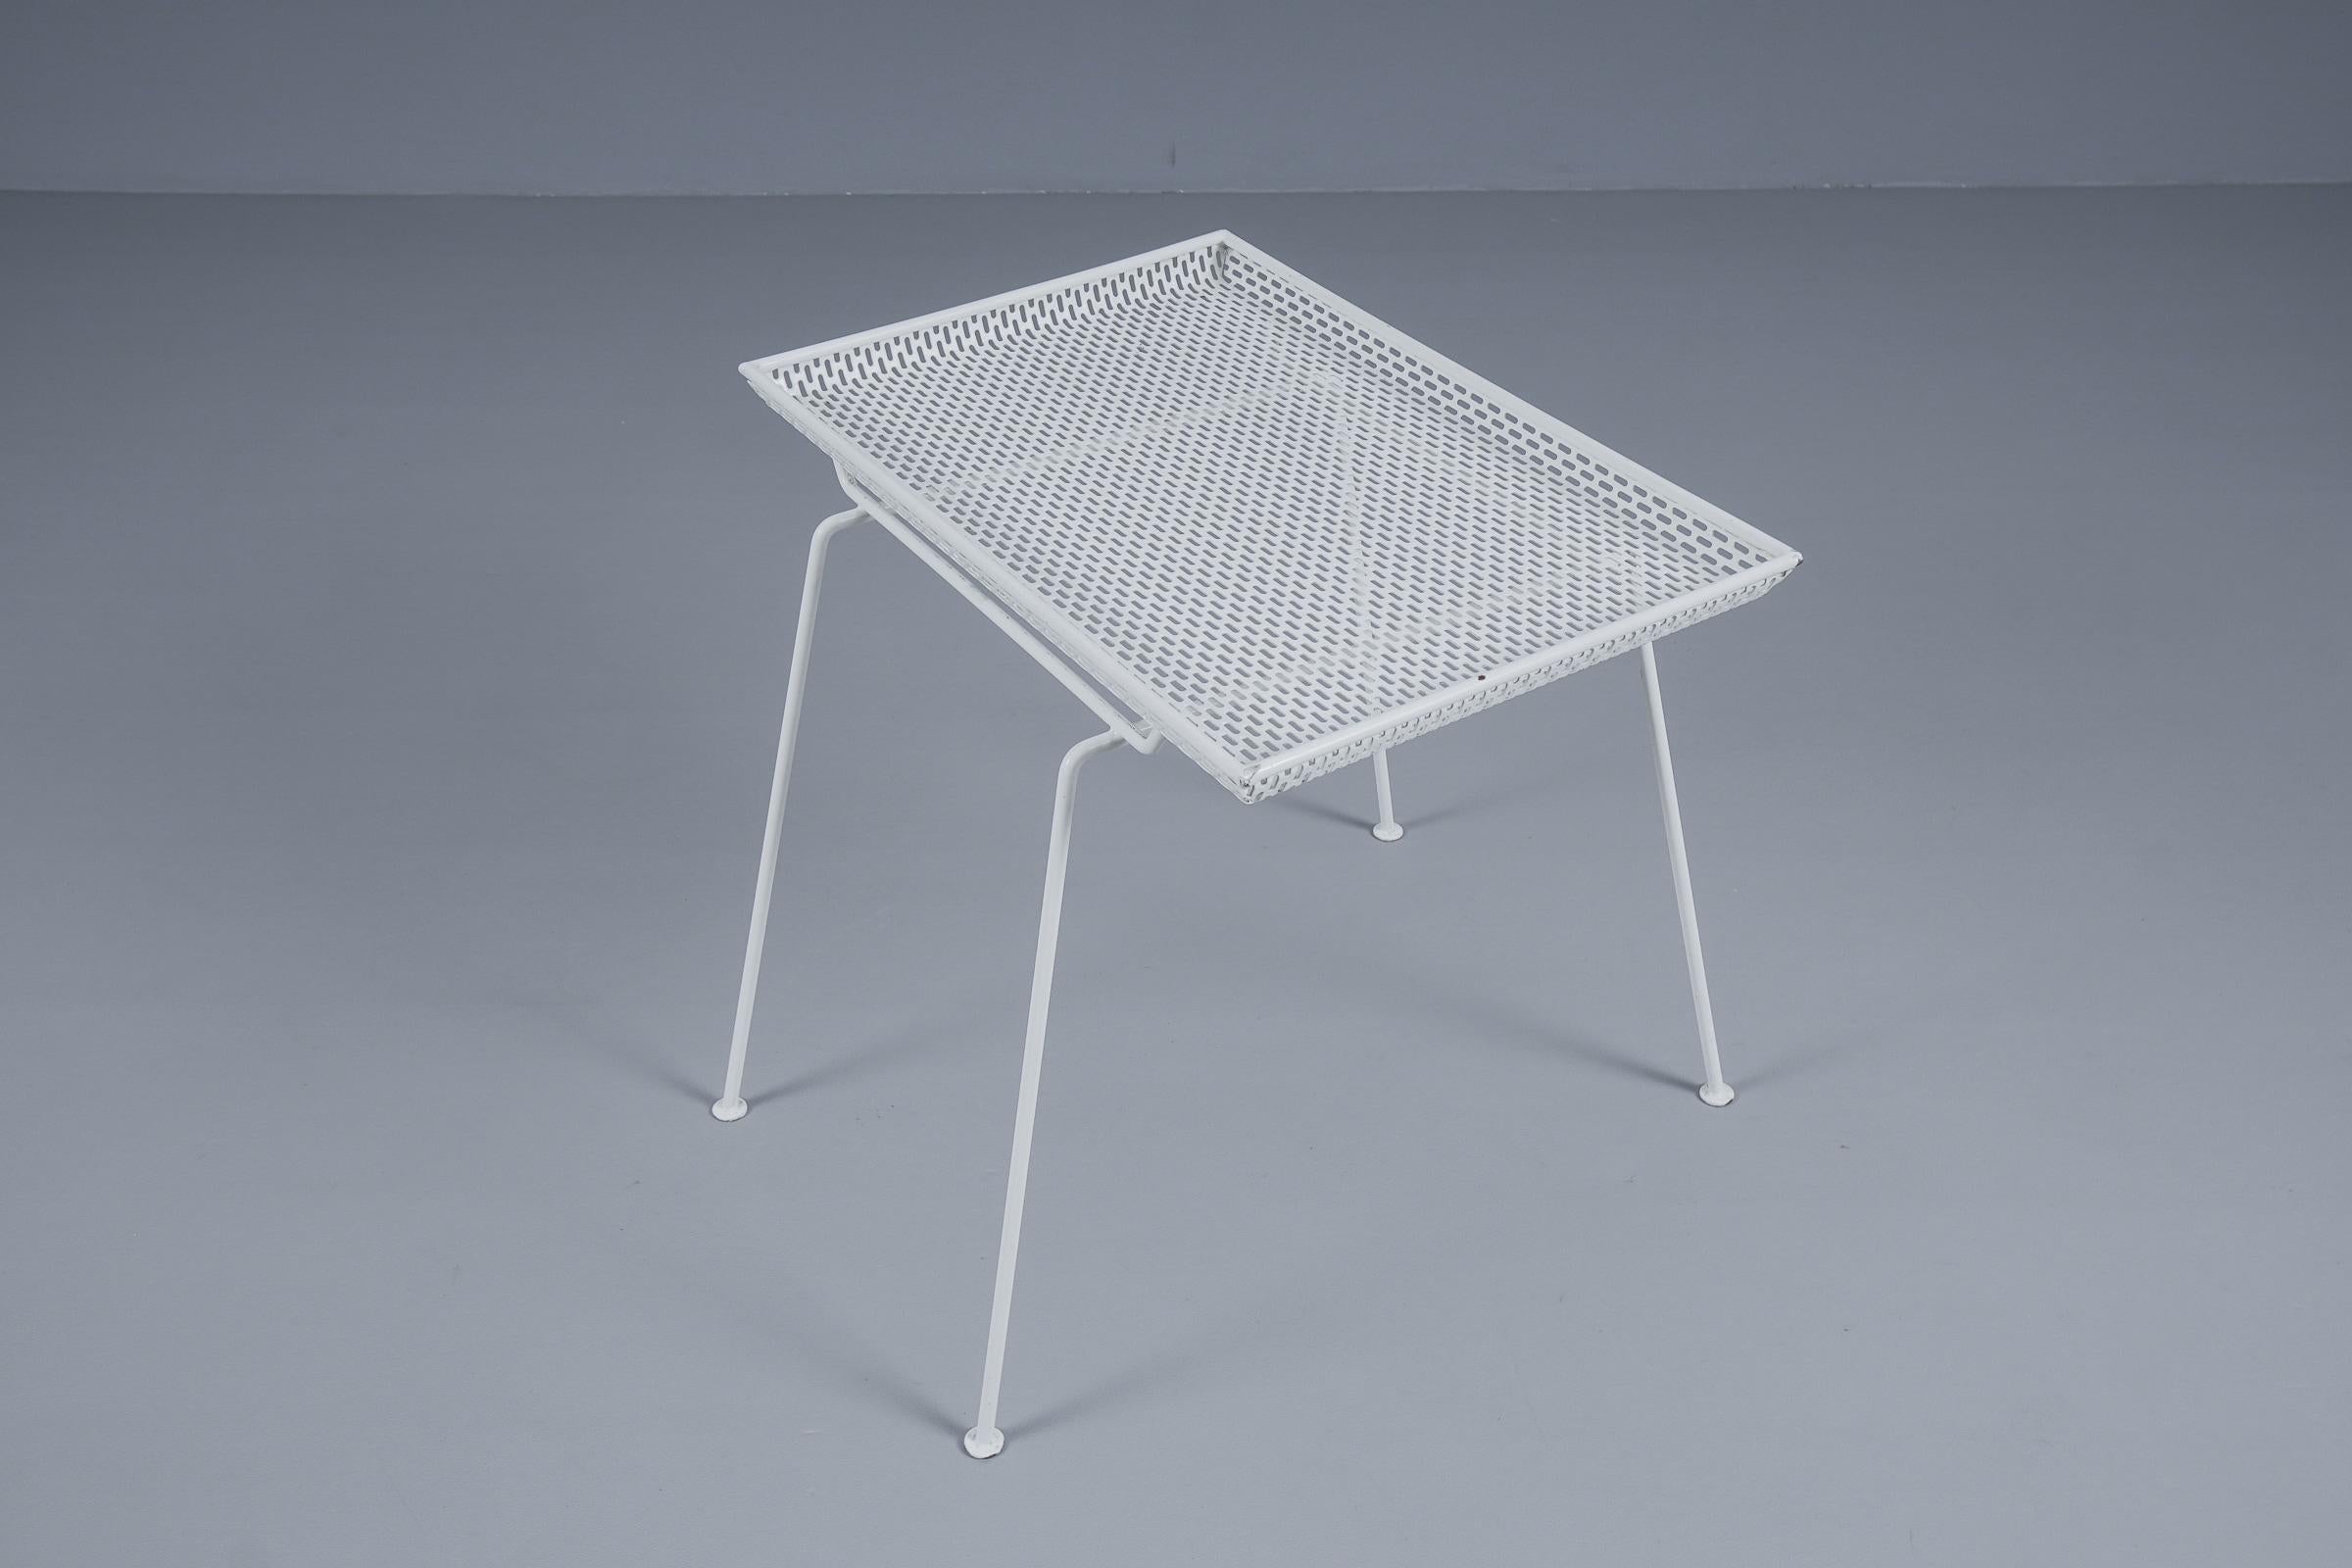 French Side Table in Perforated White Lacquered Metal With Removable Tray, 1950s For Sale 1